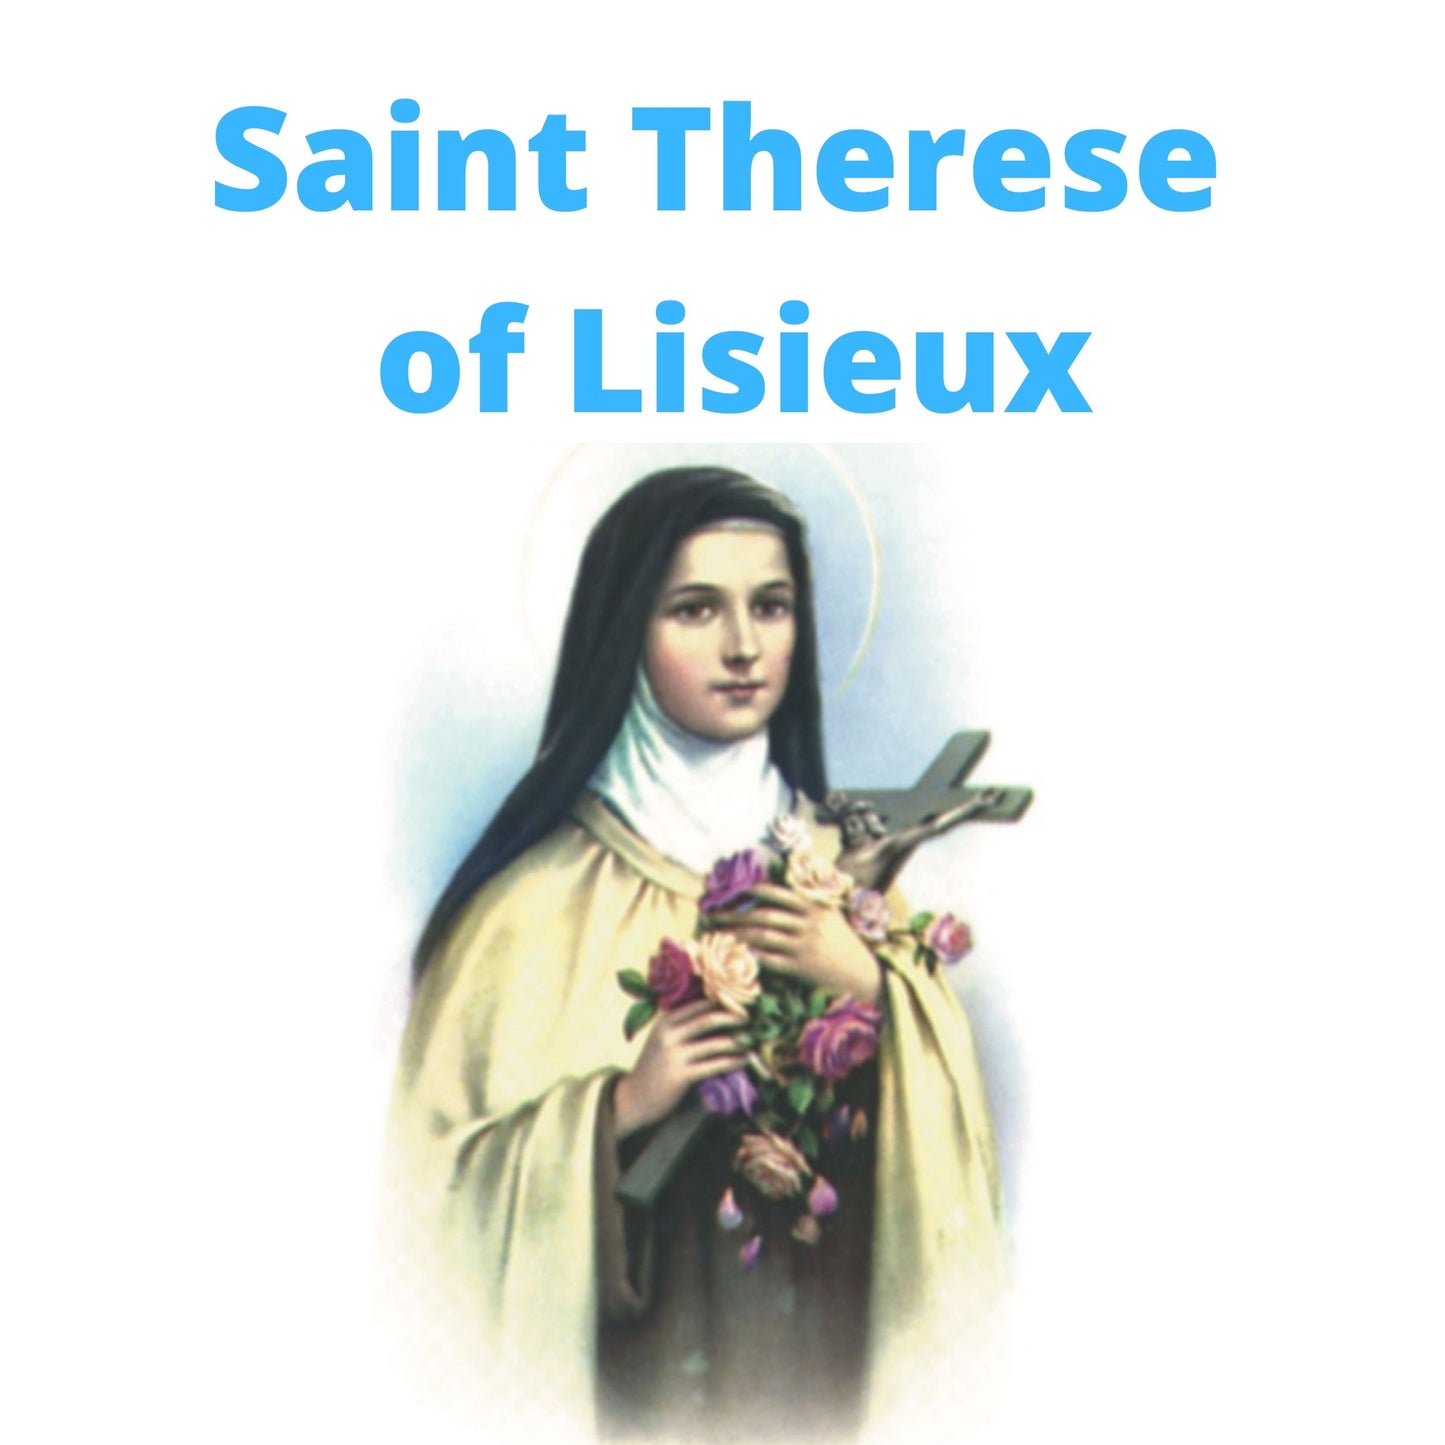 Saint Therese of Lisieux Video Download MP4 - Bob and Penny Lord